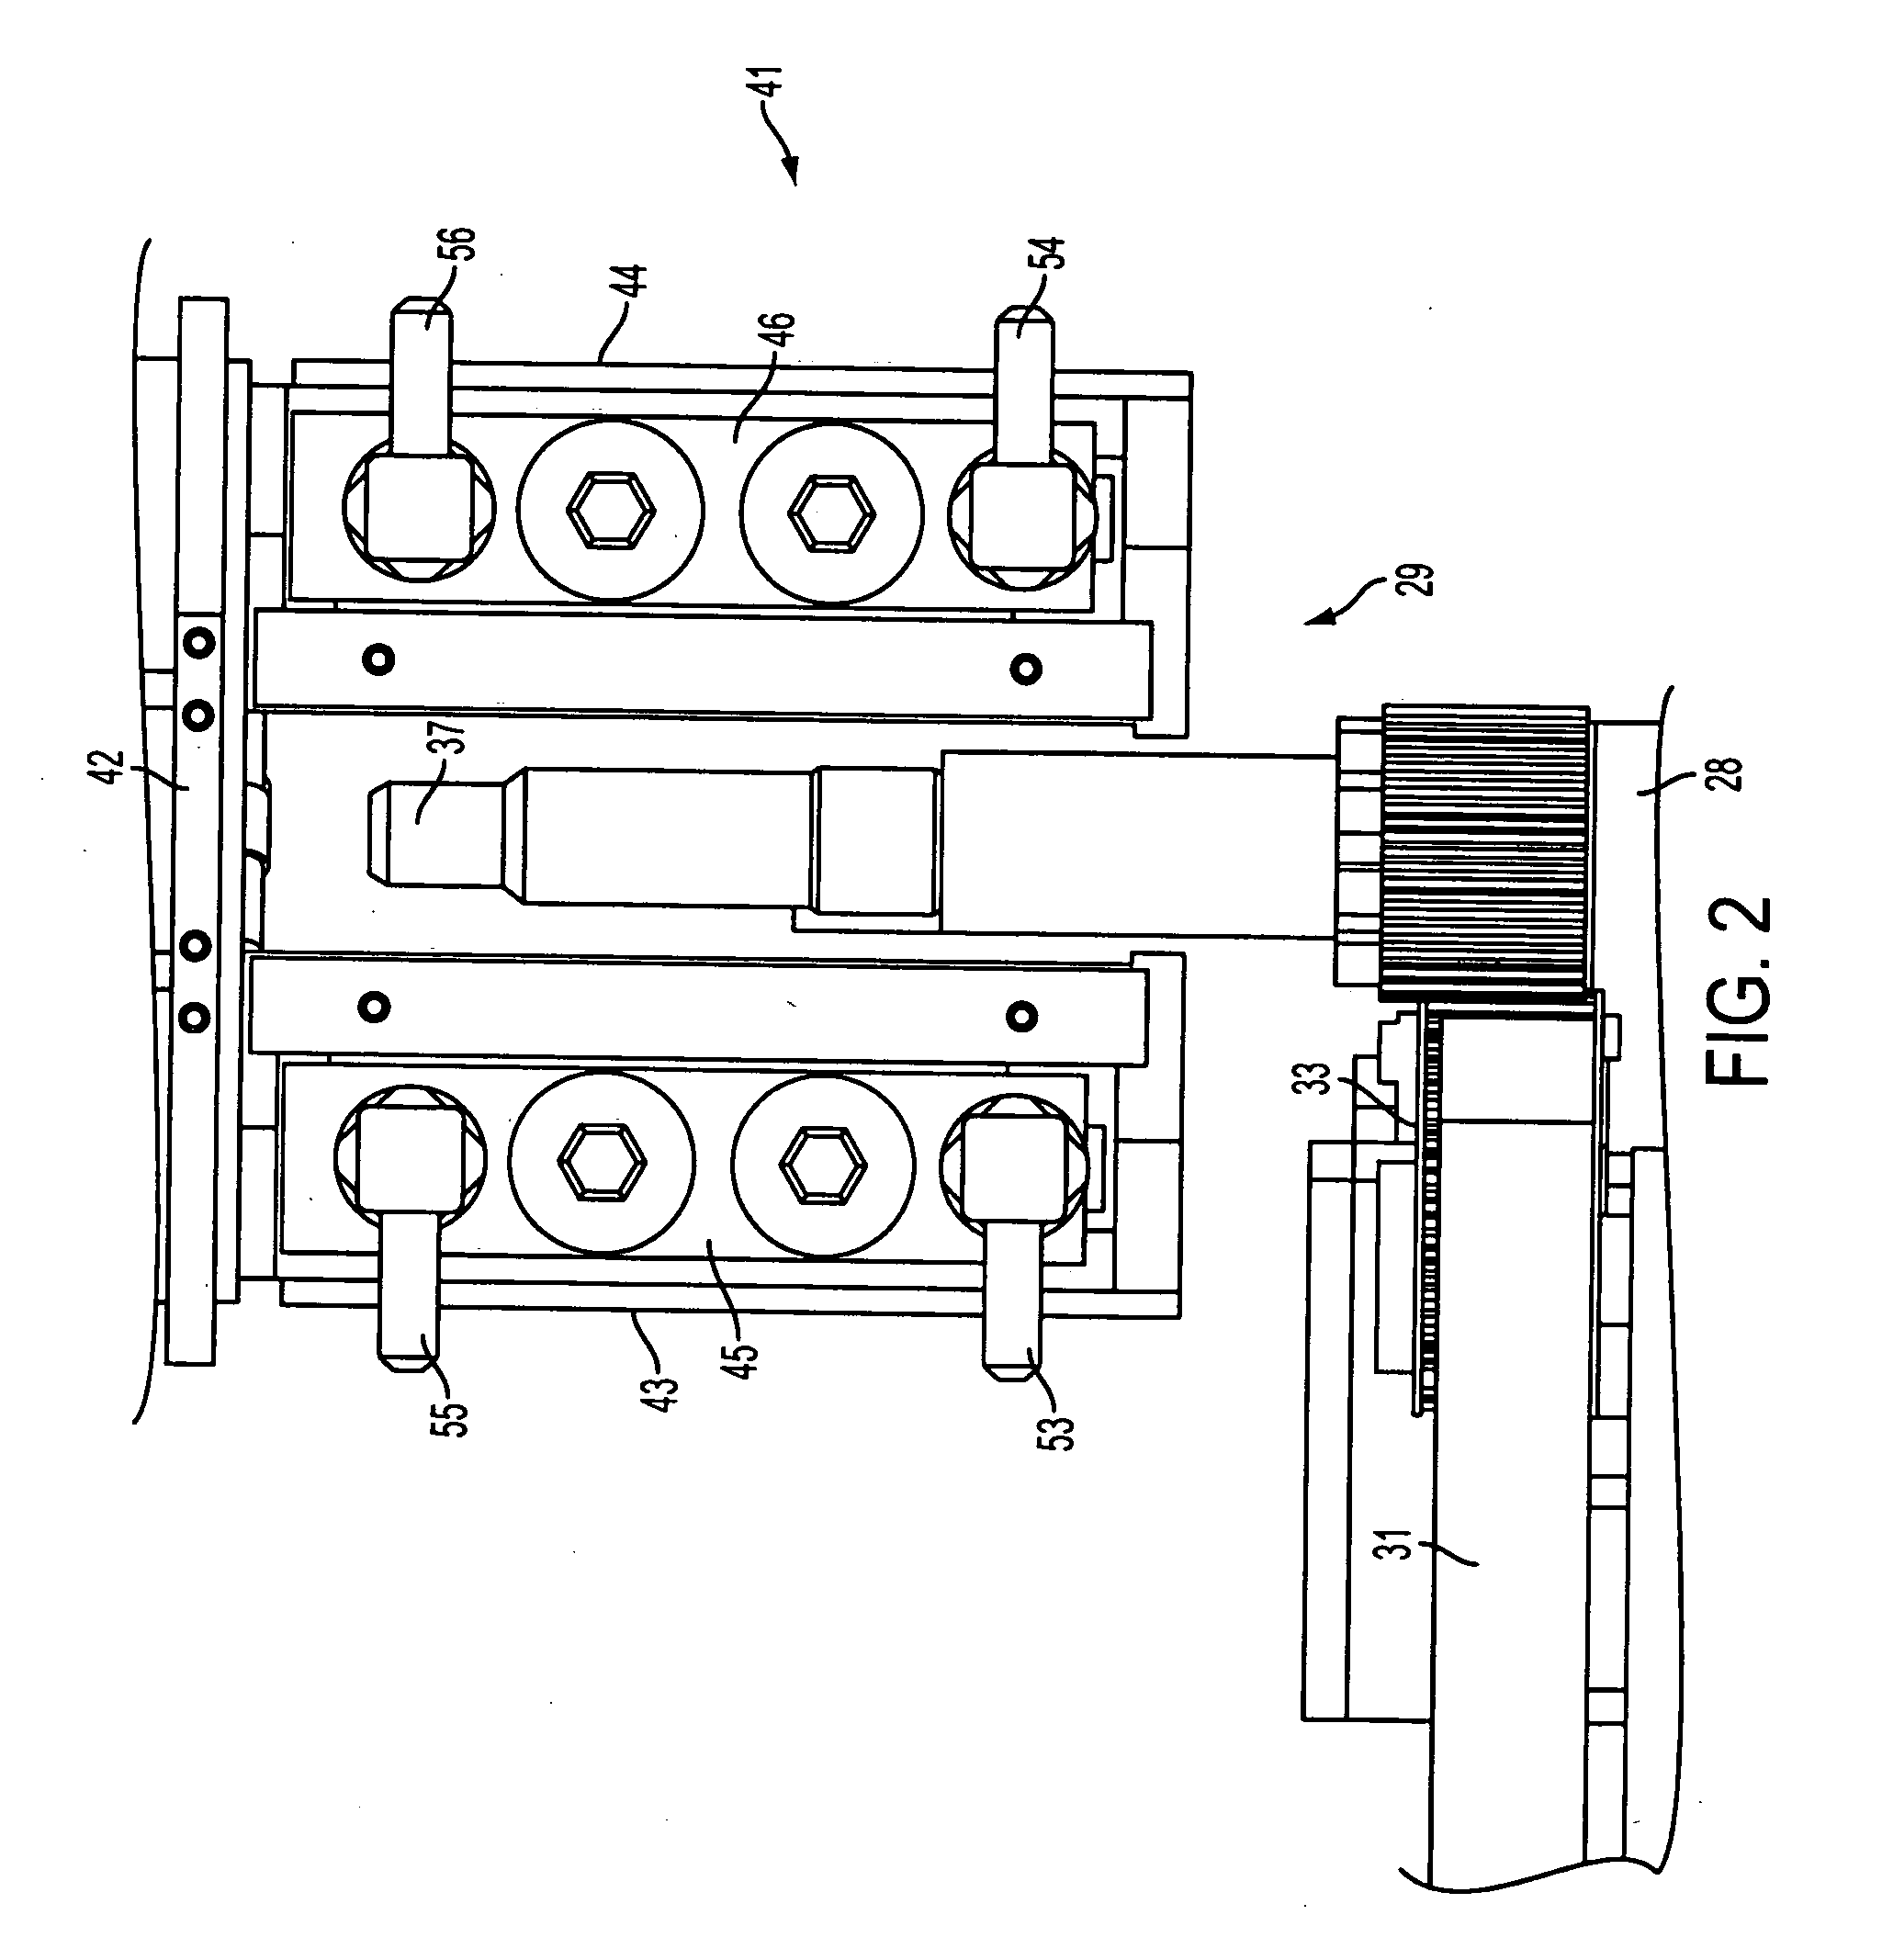 Process of and device for induction-hardening helical springs